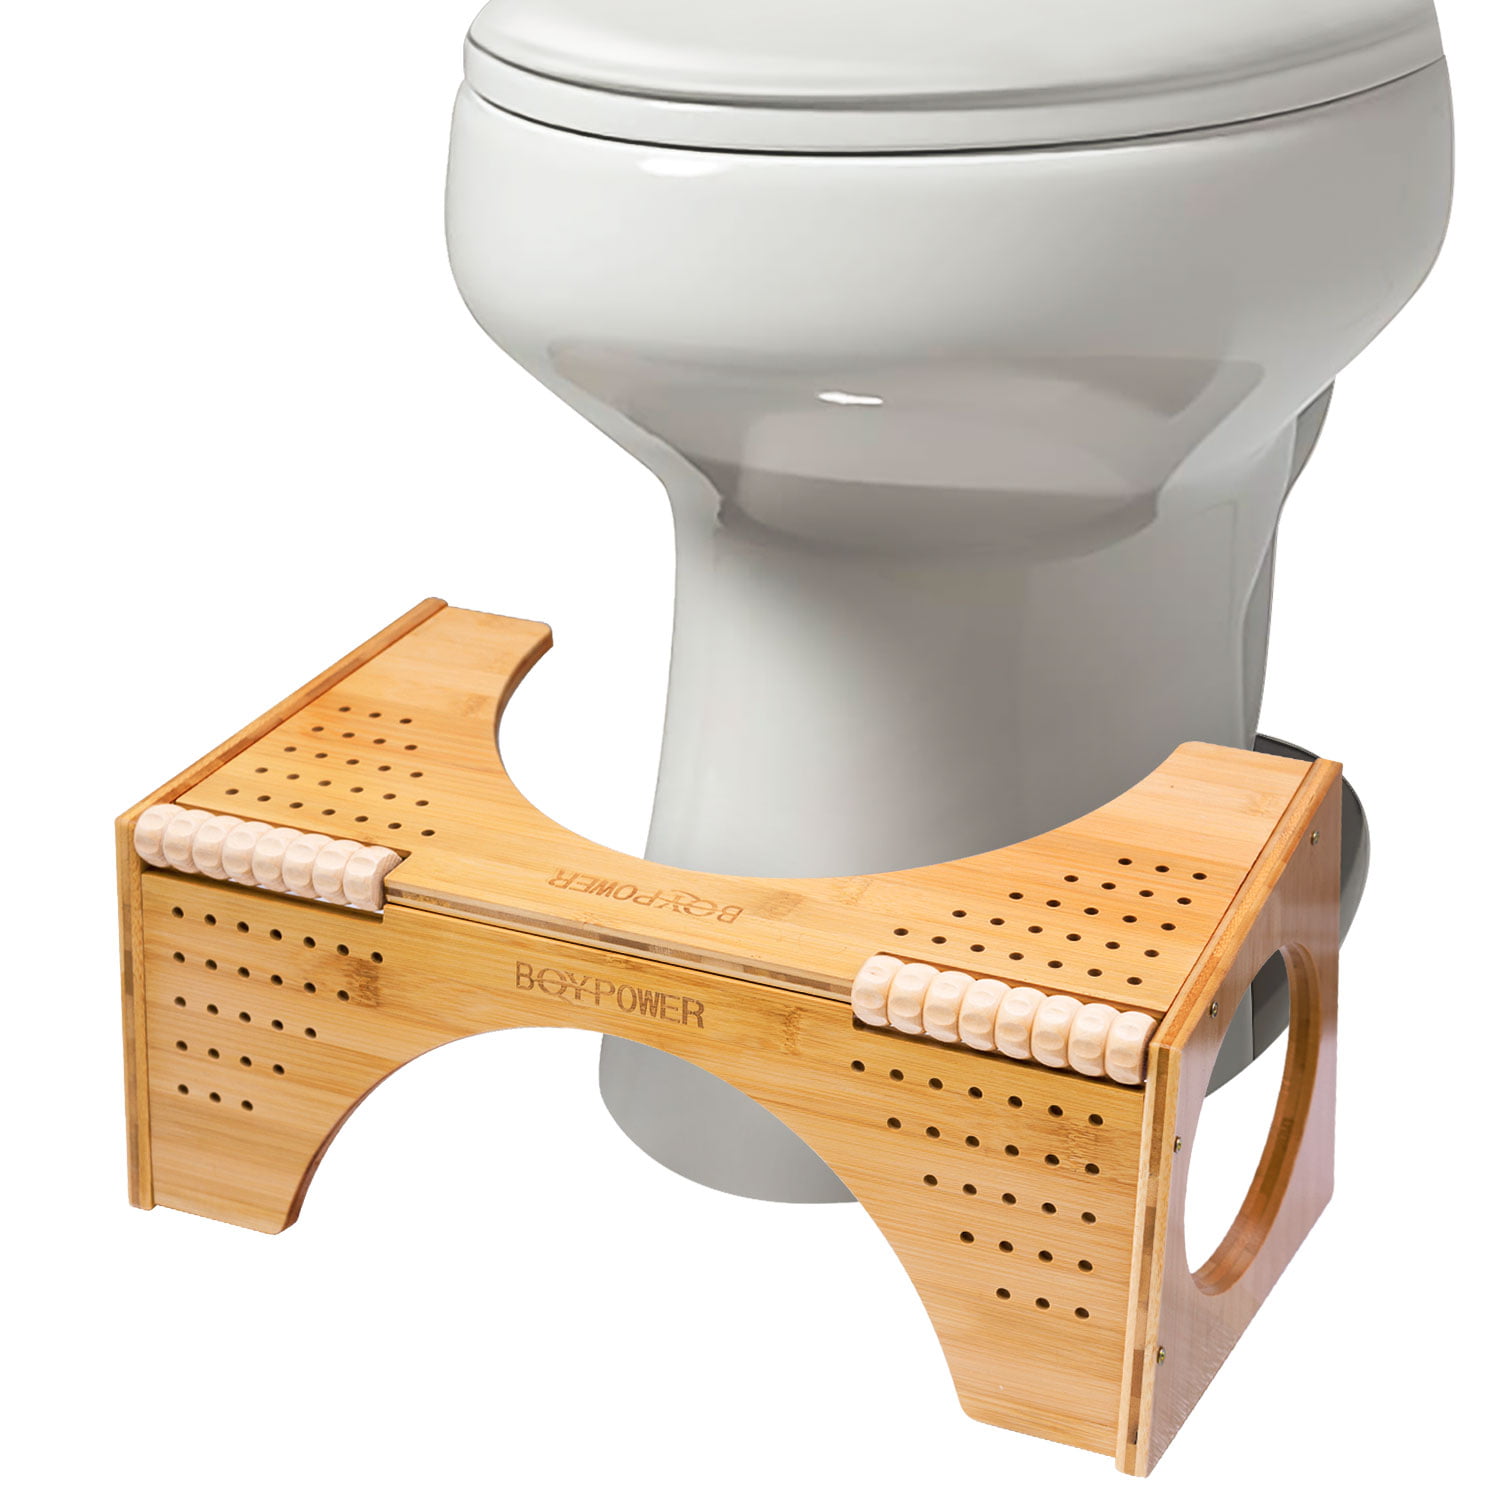 Bathroom Toilet 9 inch Squatting Foot Seat Stool Assistant for Proper Posture 